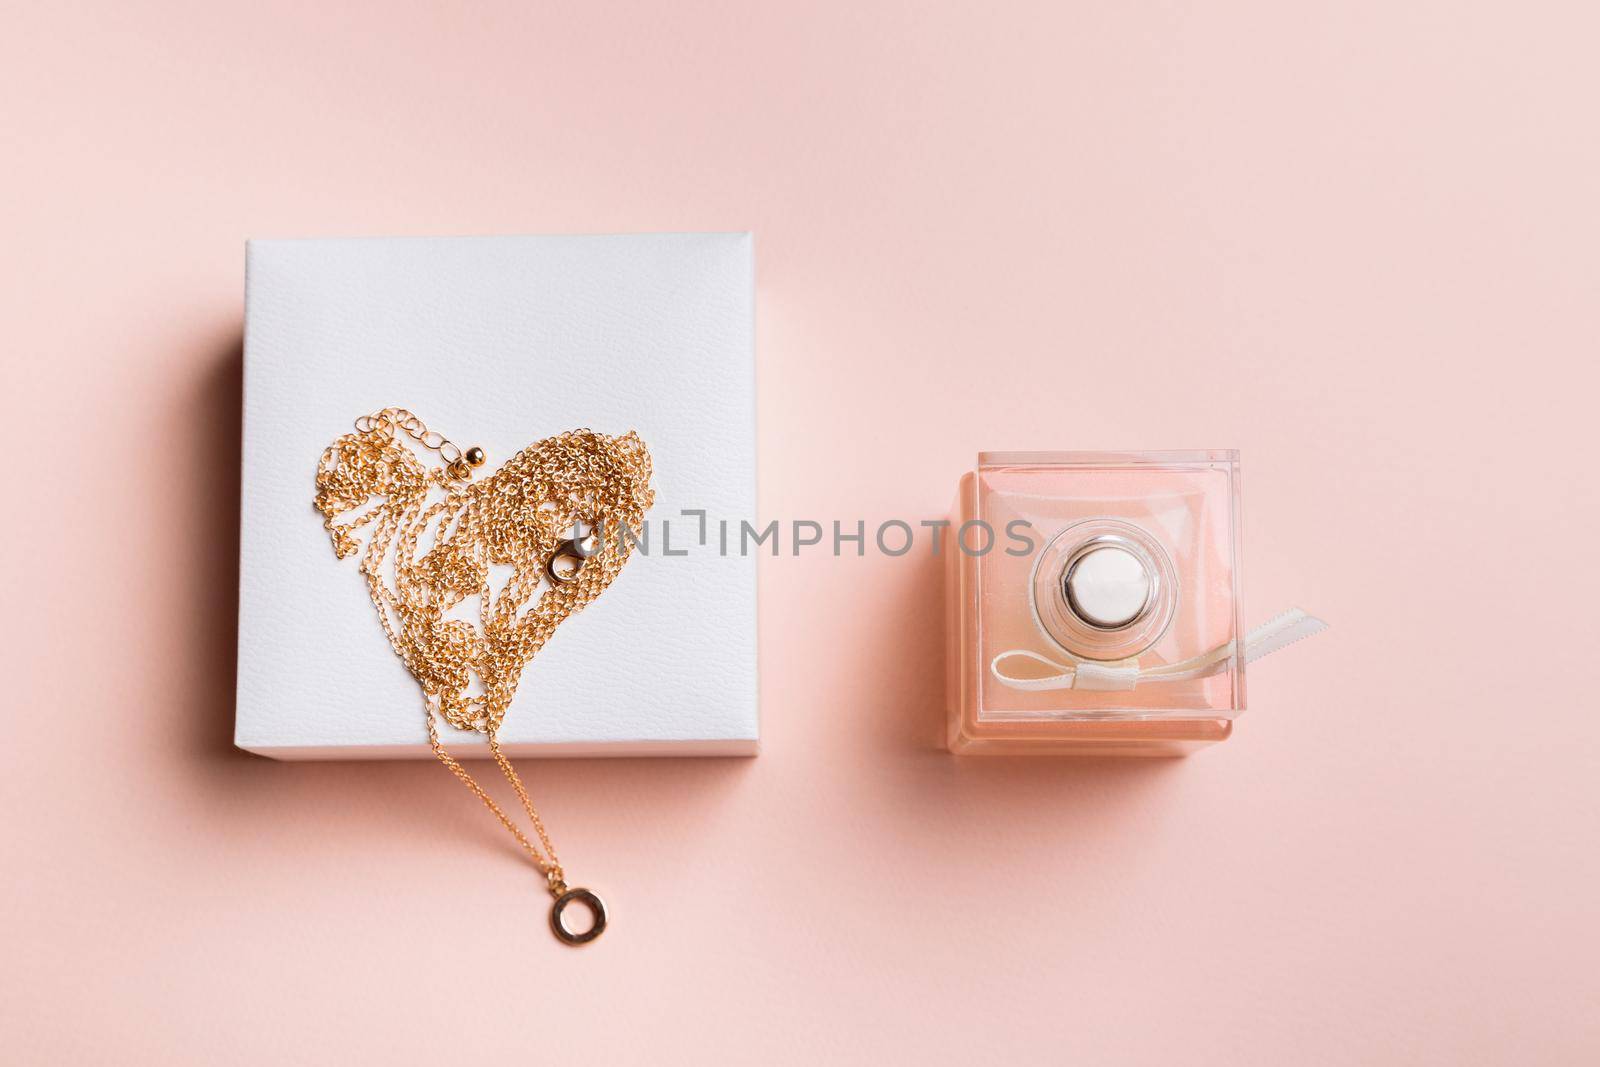 A gift for Valentine's Day. Perfume and a box with a gold chain on a pink background.